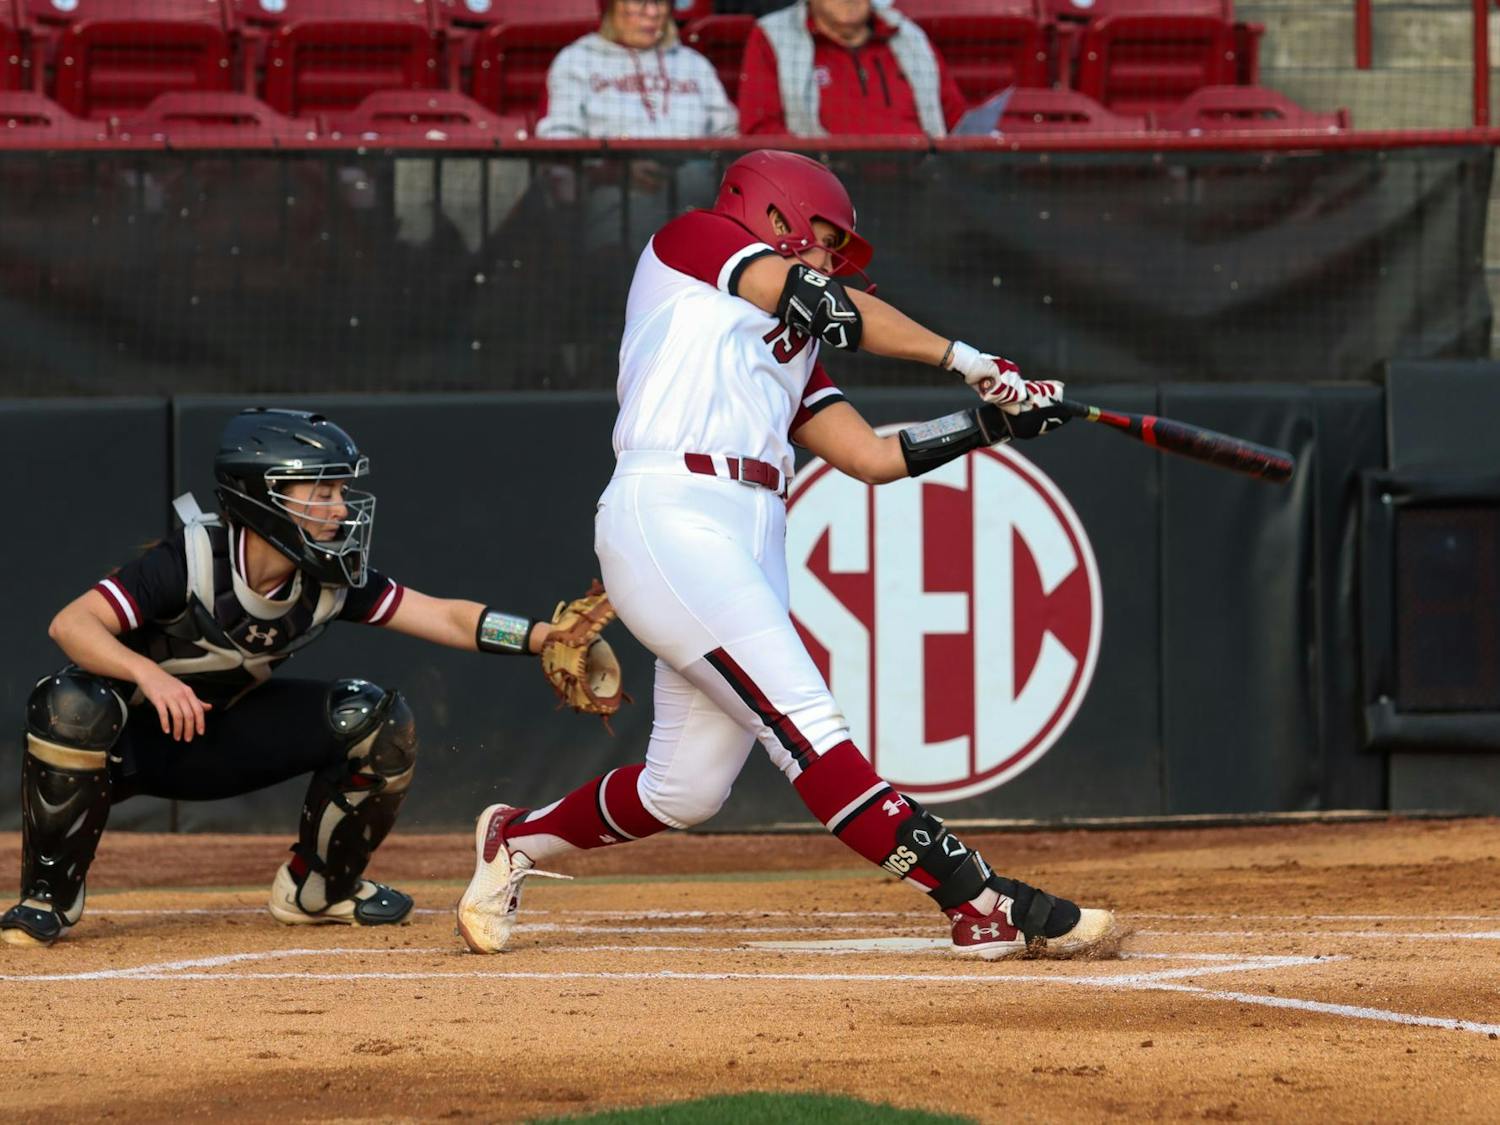 Senior catcher Jen Cummings hits to the outfield during South Carolina's matchup against the College of Charleston on Feb. 28, 2024. Cummings later scored, contributing to the four total runs earned by the Gamecocks in its 4-0 victory.